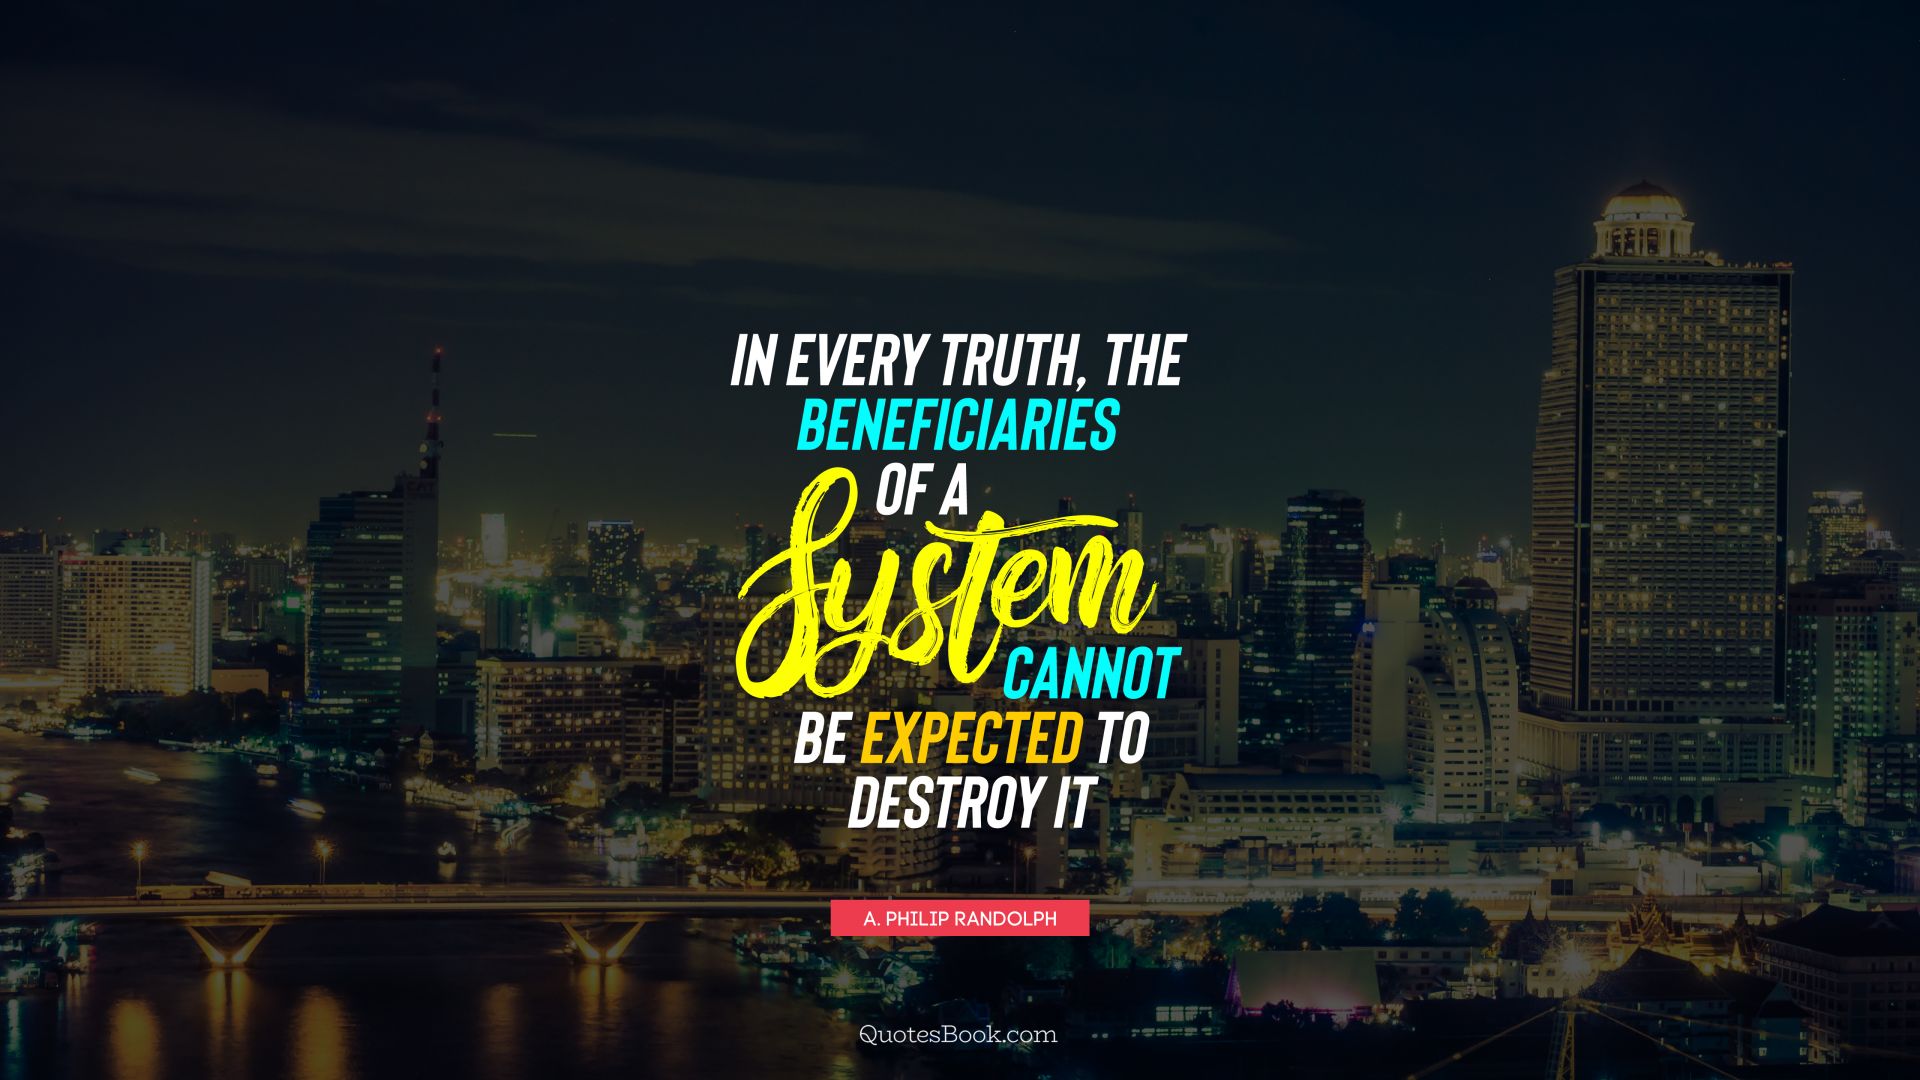 In every truth, the beneficiaries of a system cannot be expected to destroy it. - Quote by A. Philip Randolph